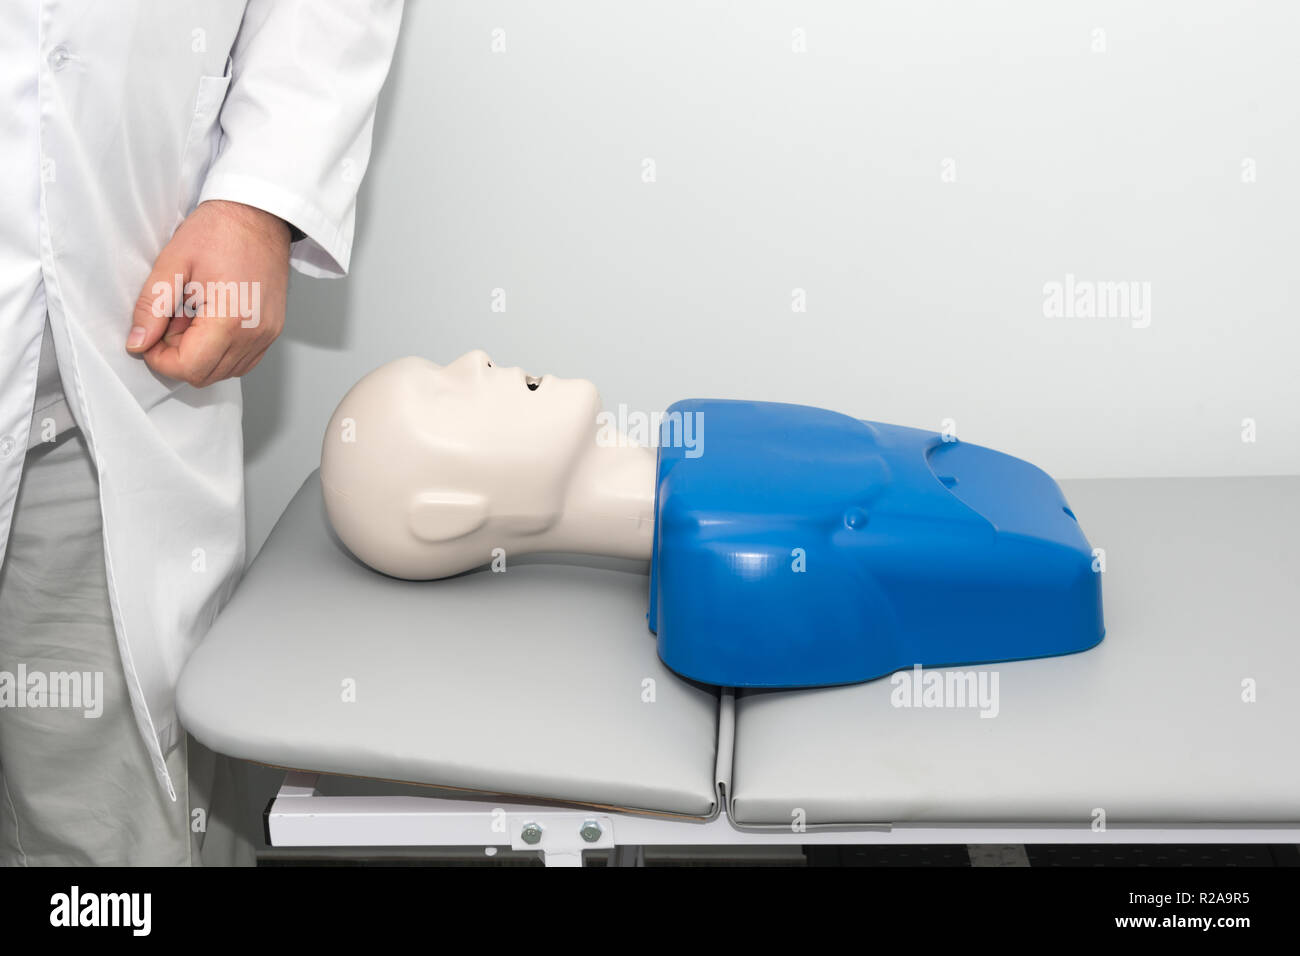 Hospital training dummy on hospital bed with mouth open. Horizontal image with copy space. Medical first aid learning training mannequin Stock Photo